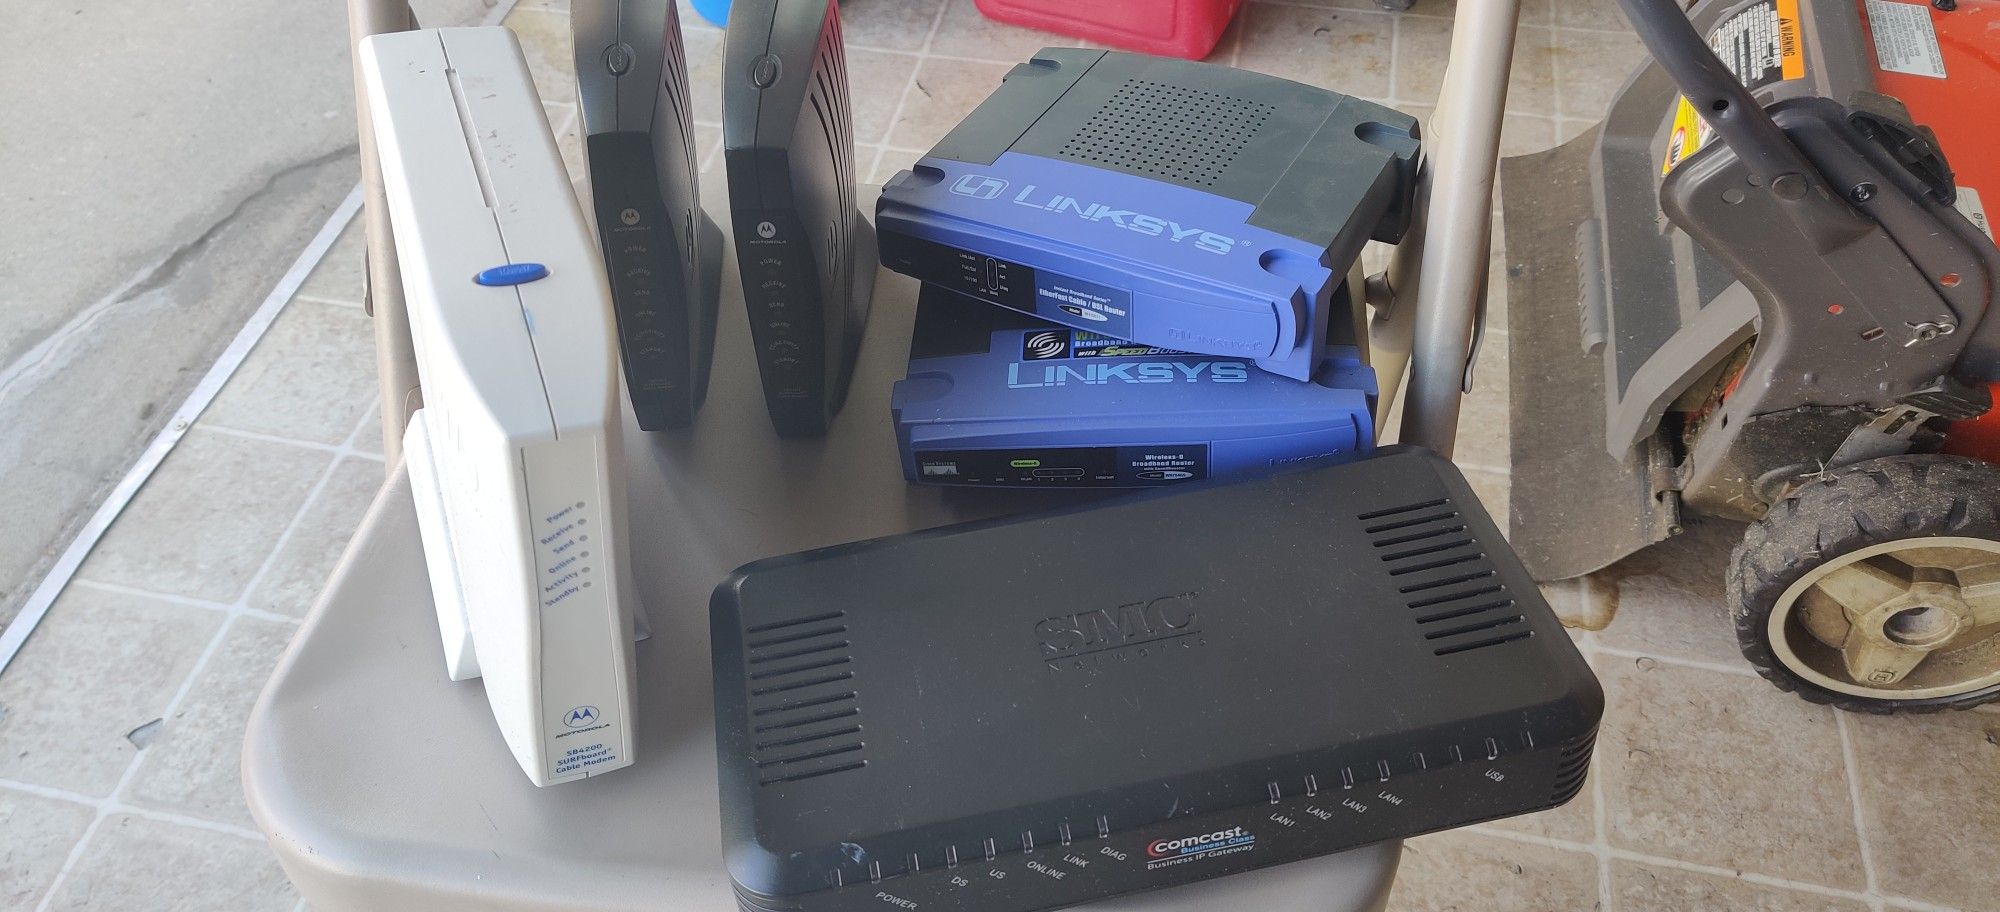 Modems and routers